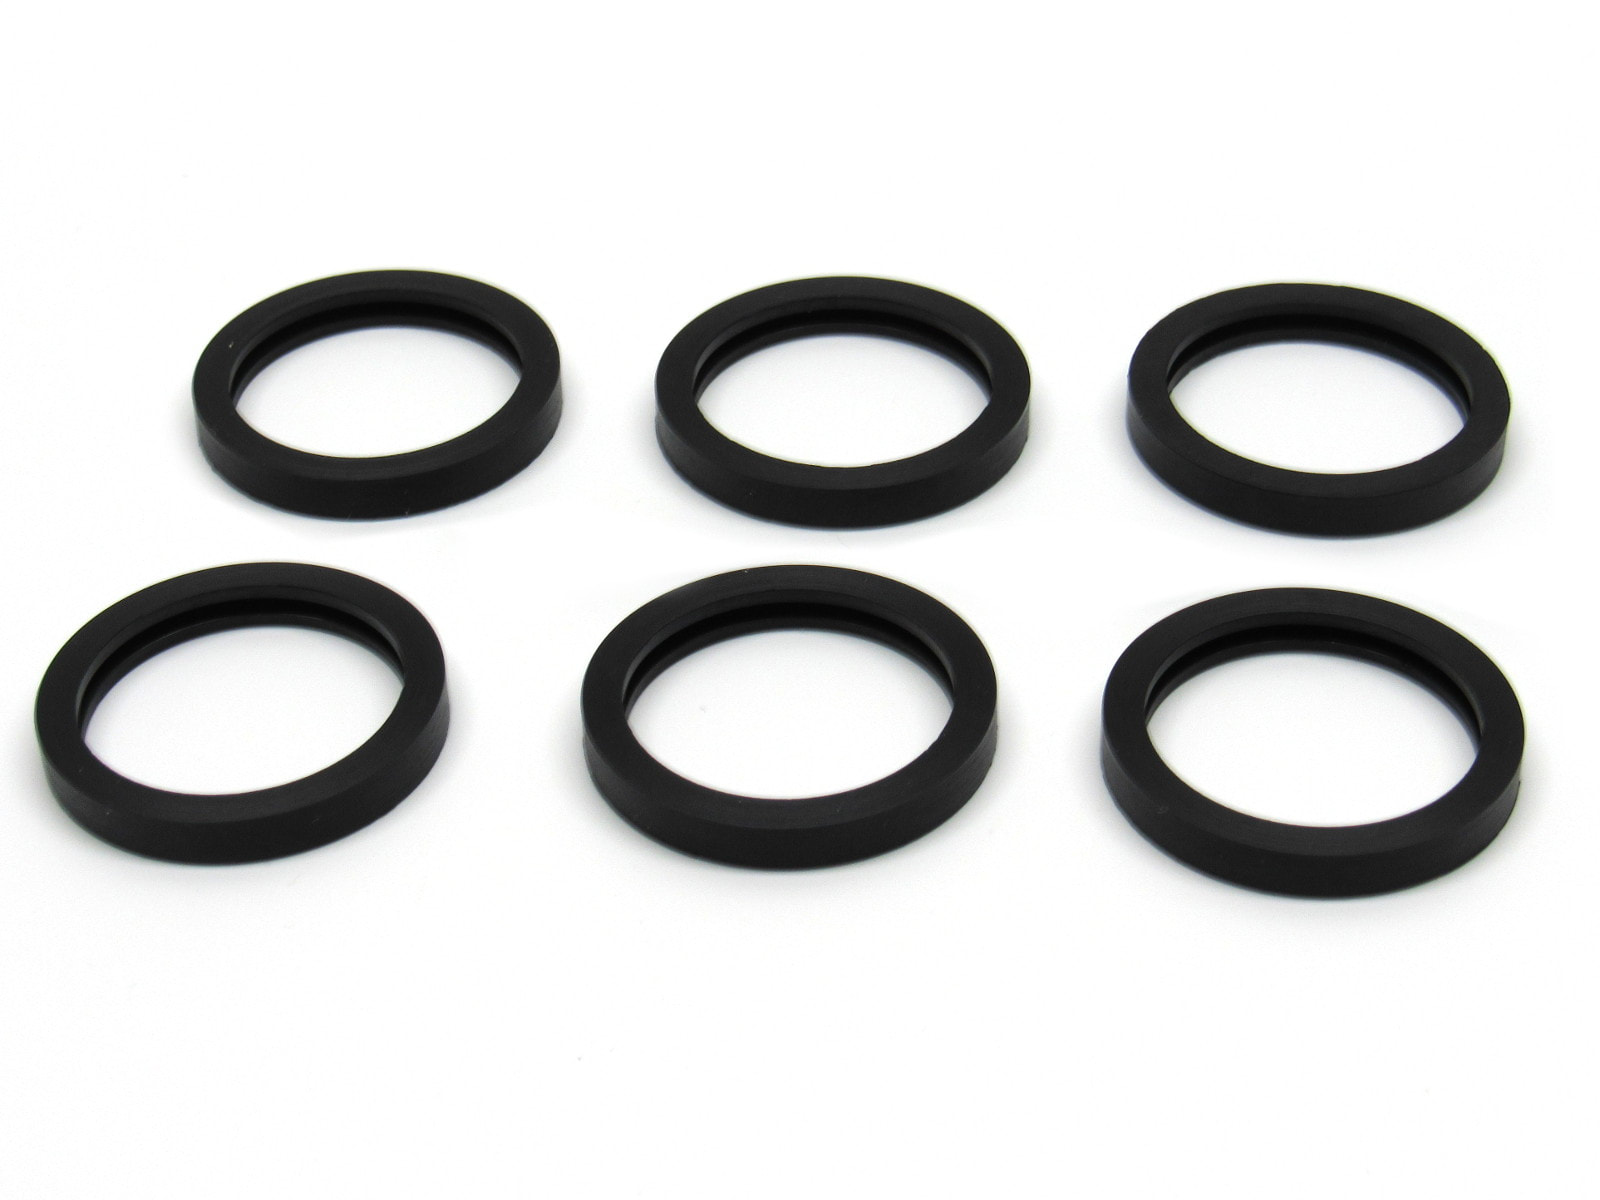 8pcs Gas Can Rear Vent Cap Gasket Leash With O Ring For Gott Rubbermaid Midwest 